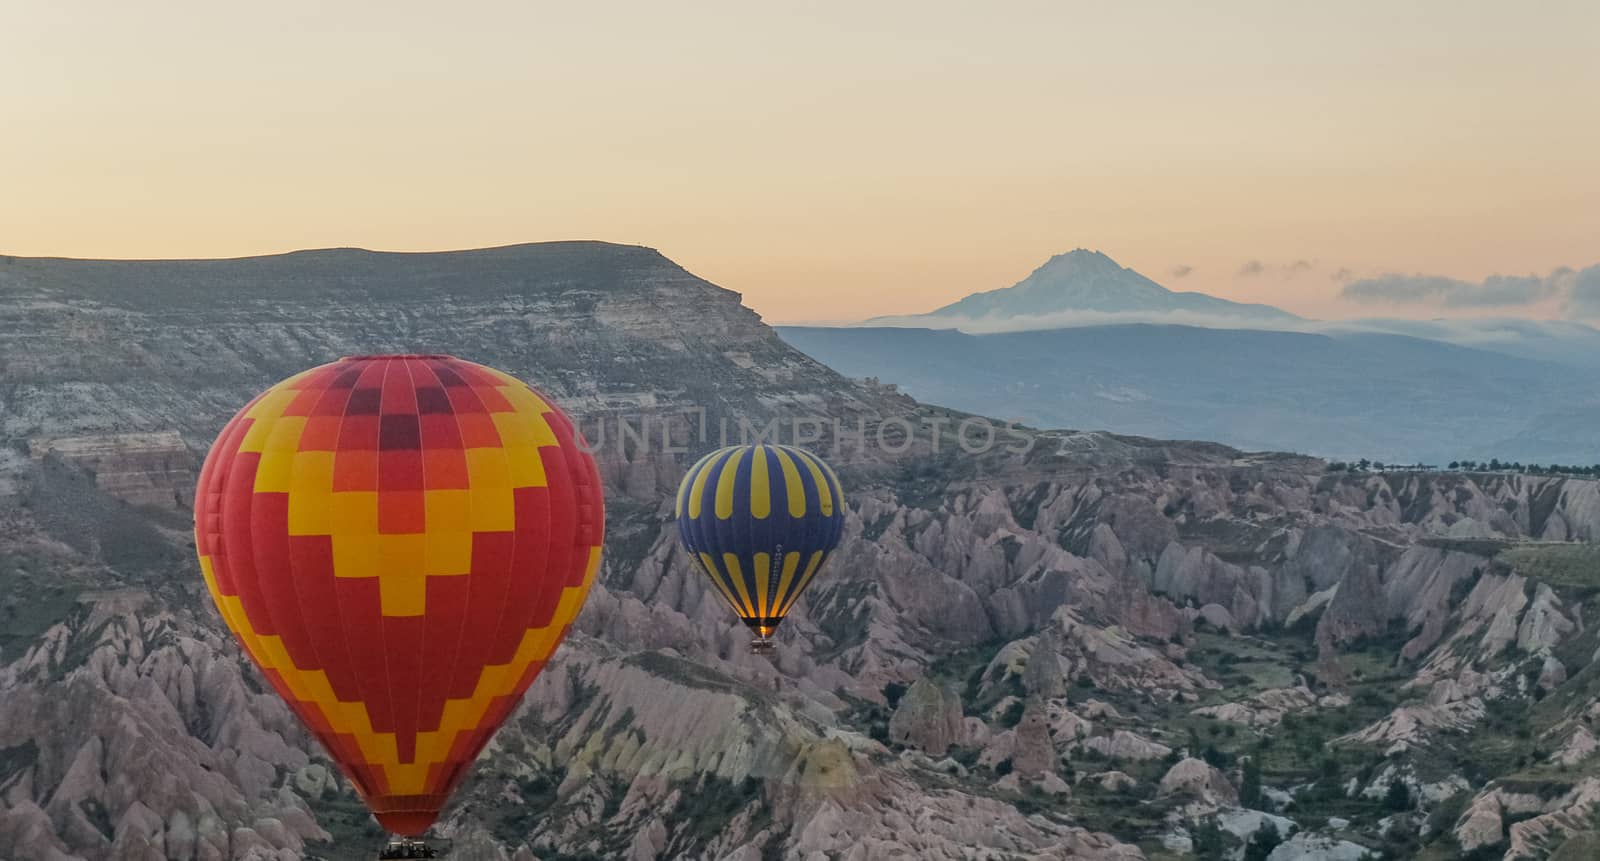 Ride with the hot air balloon over the rugged landscape of Cappadocia, Anatolia, Turkey